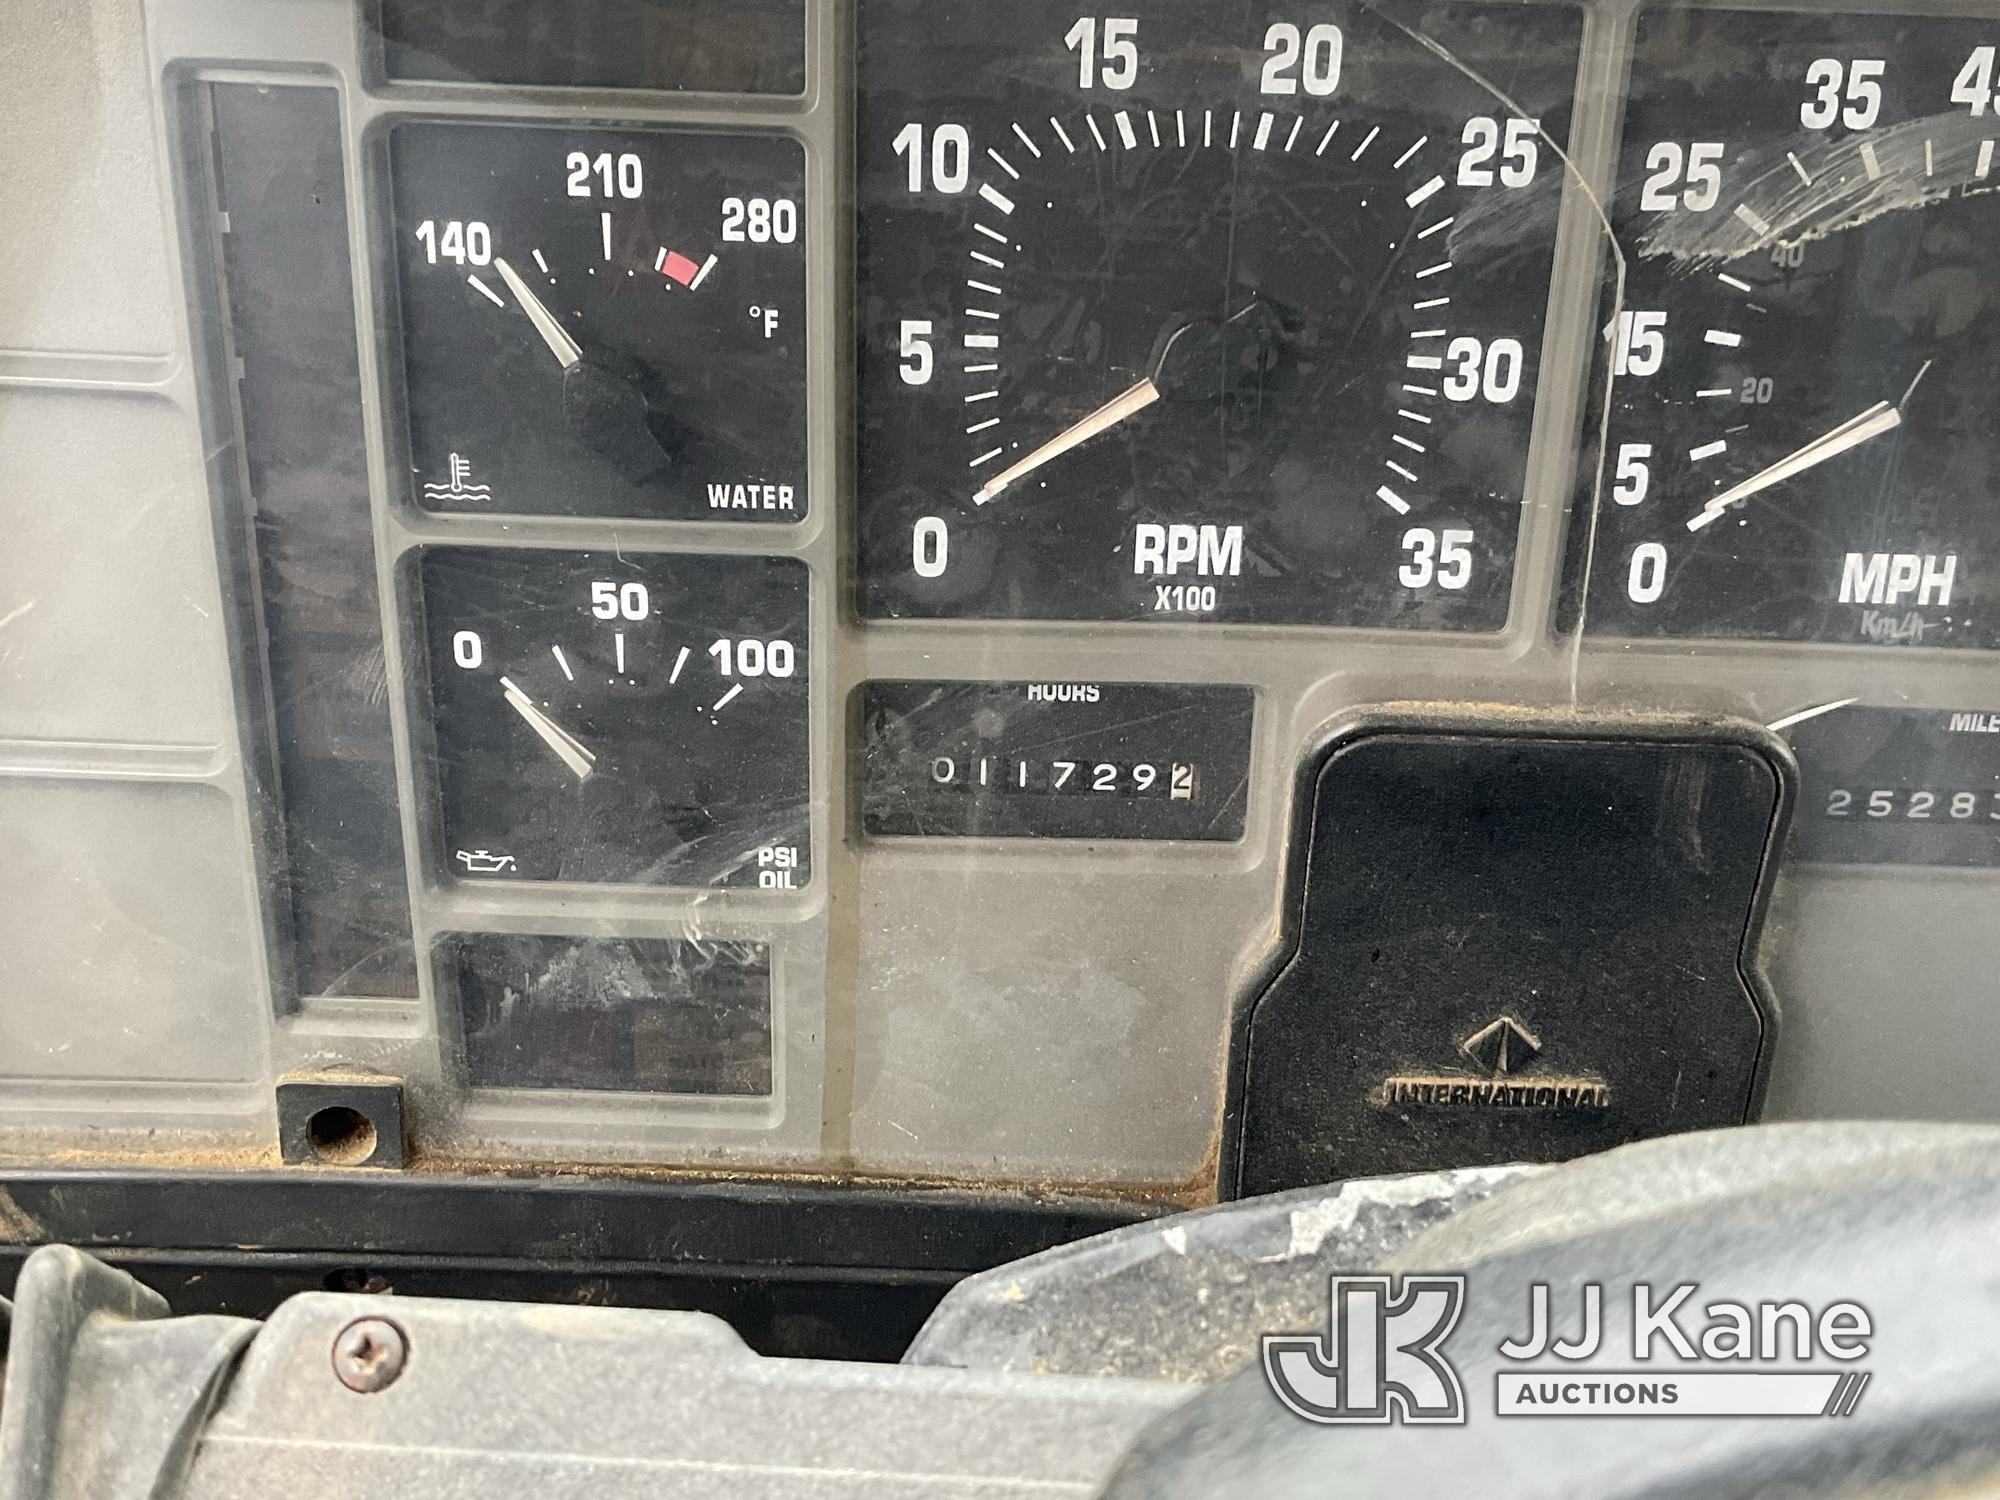 (Orleans, IN) 2000 International 4900 Reel Loader Truck, Reel With Pipe Will Be Removed. Water Tank